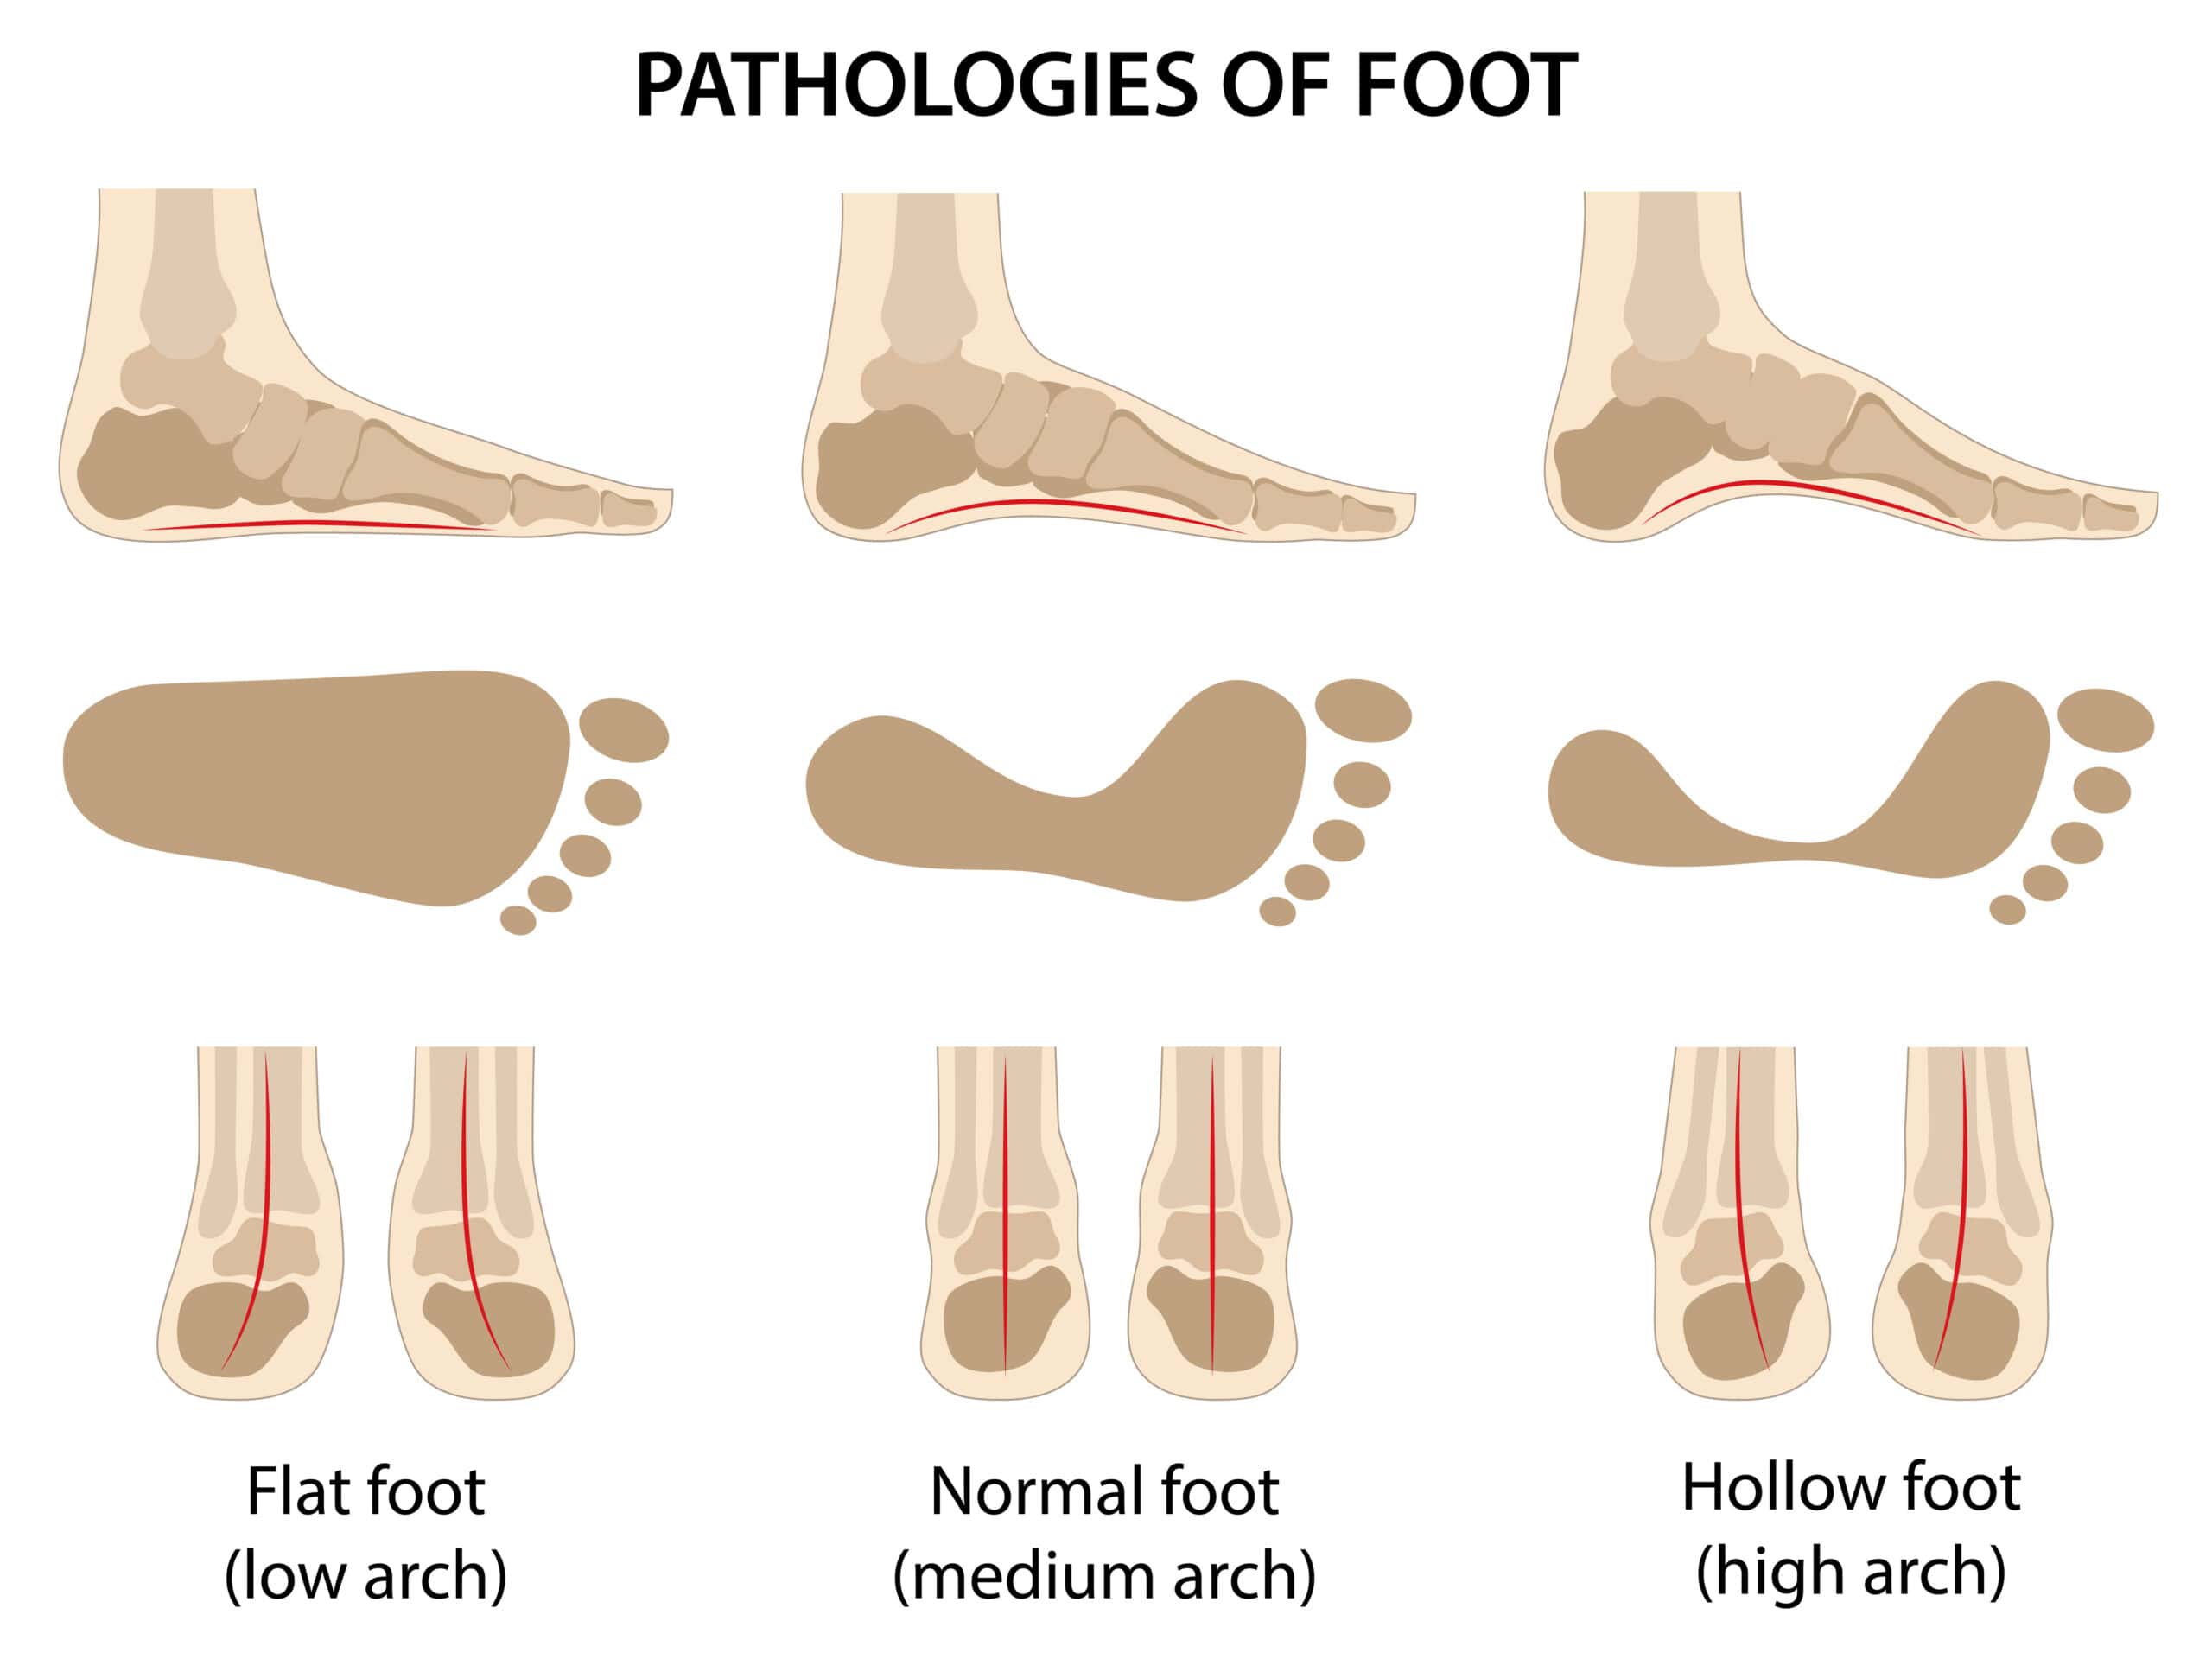 Pathologies of foot. Flat foot. Difference between sick and healthy feet.